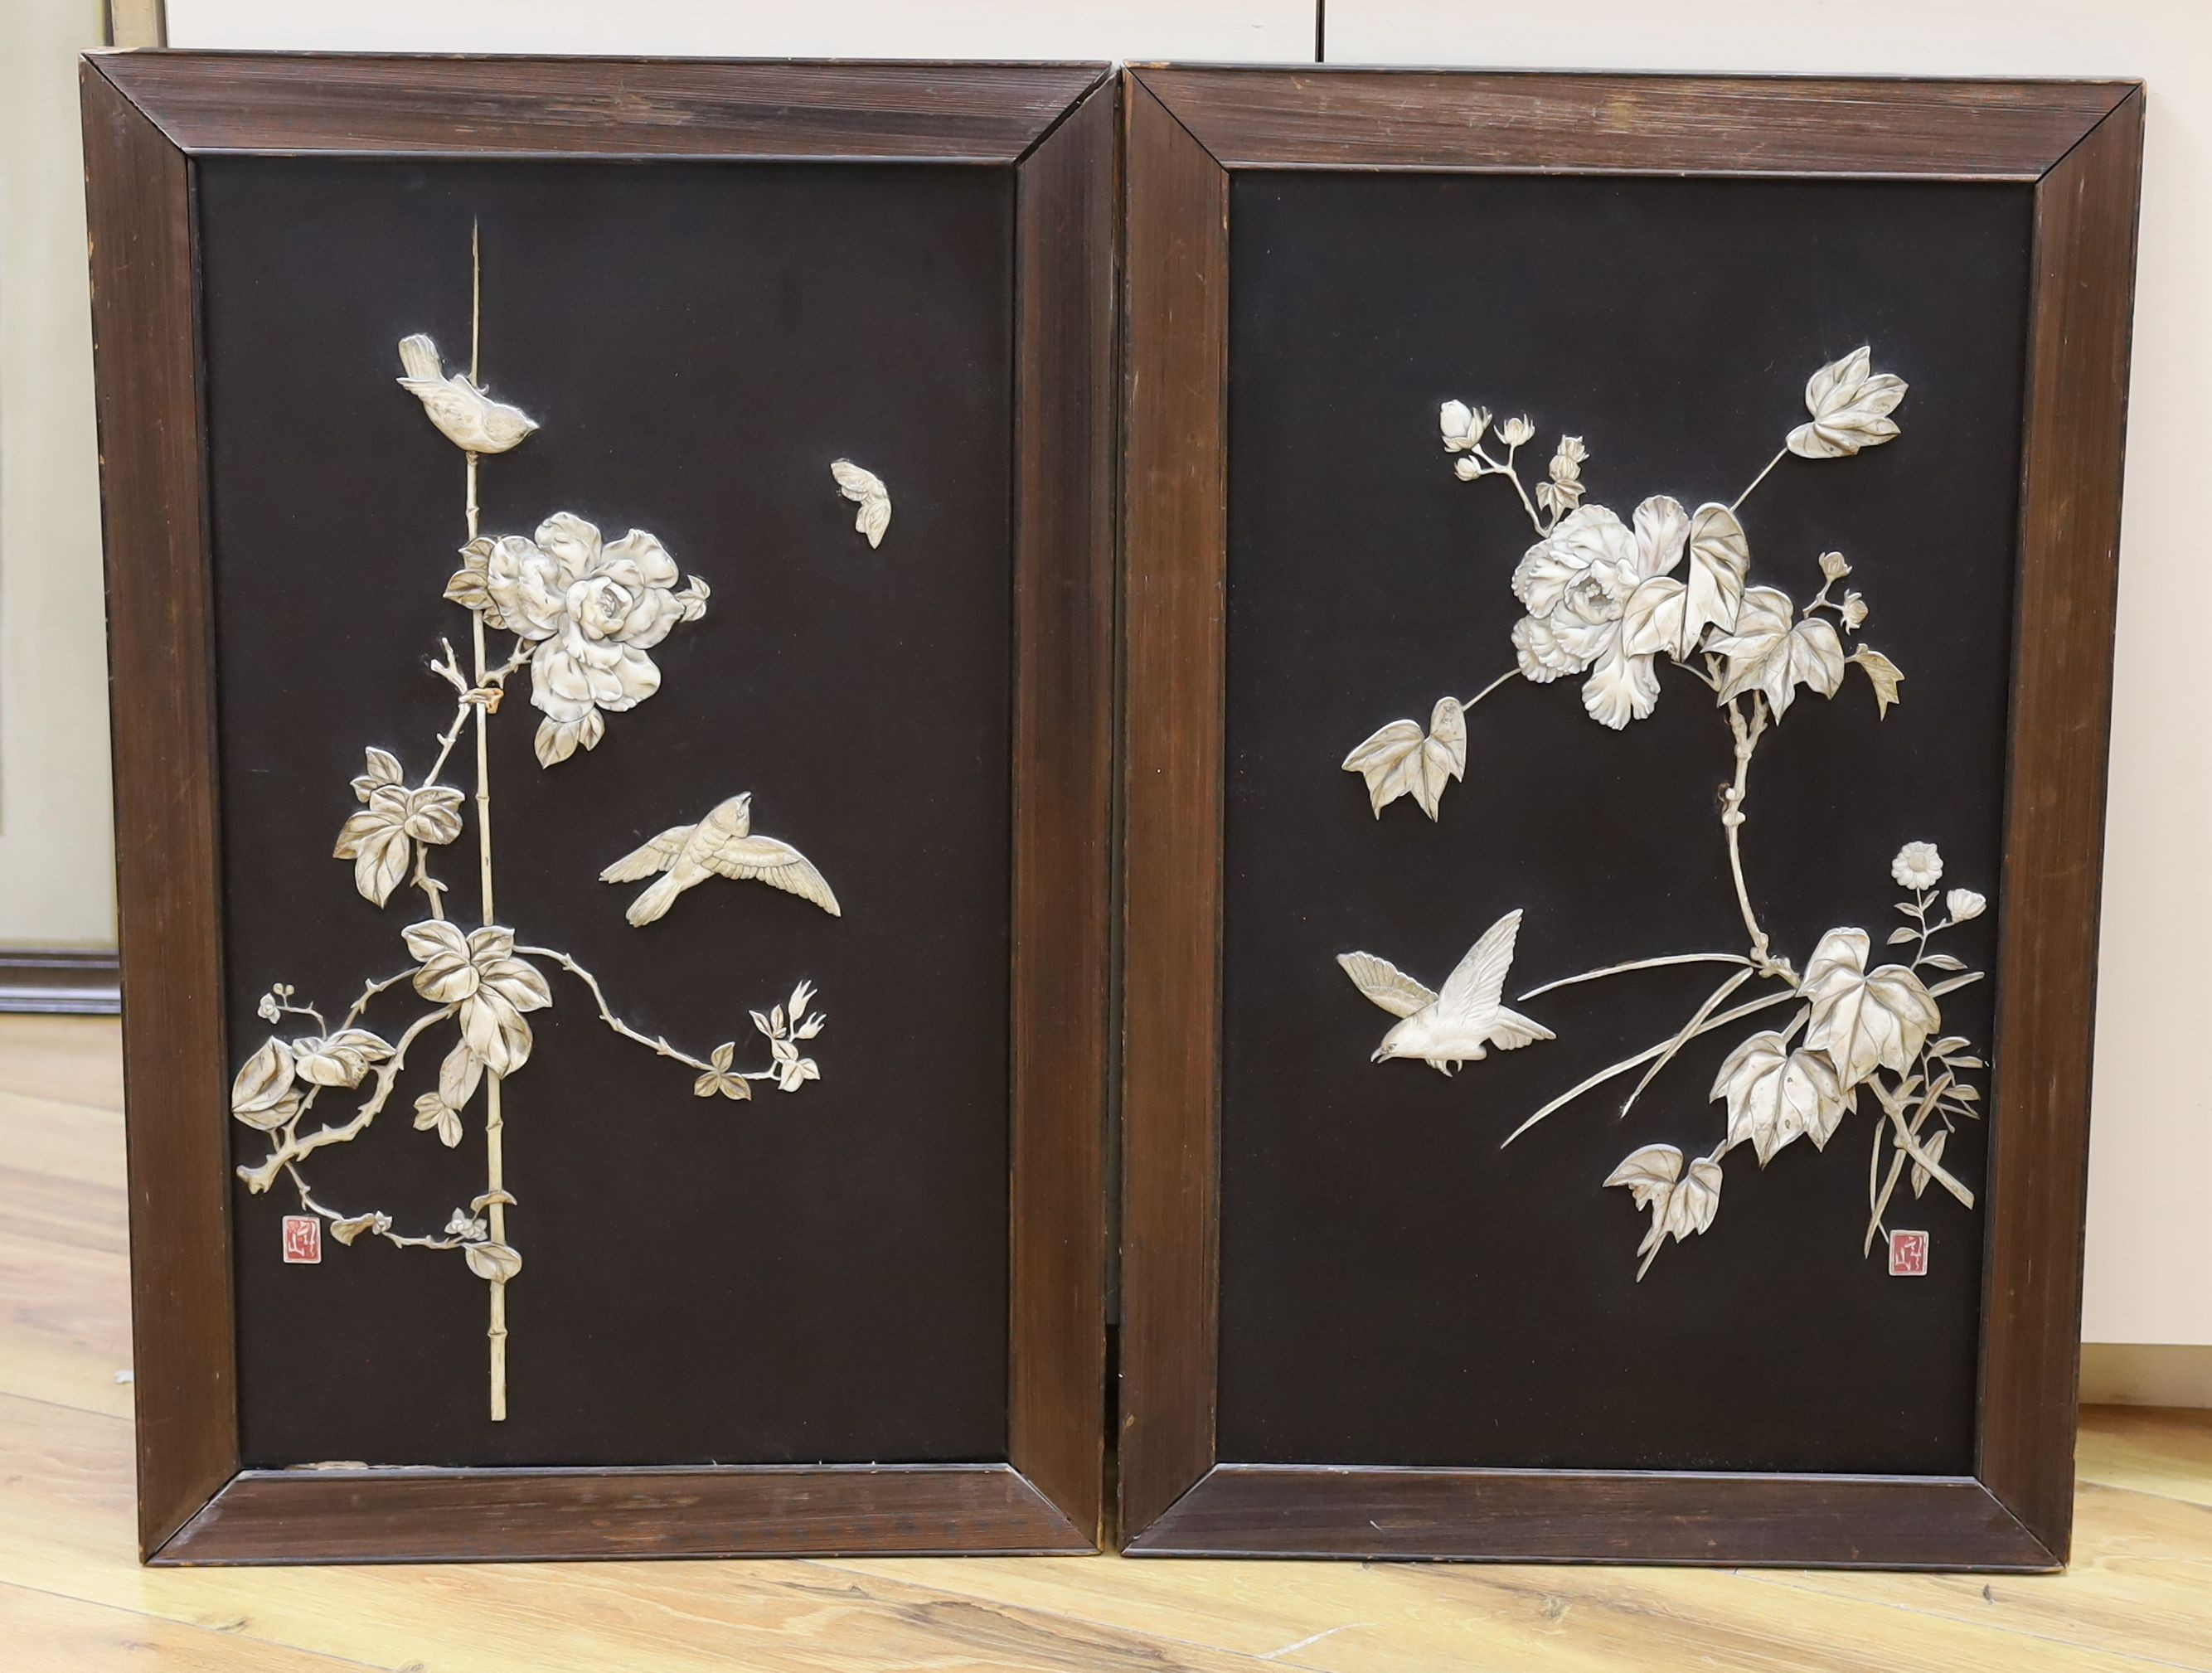 A pair of Japanese Meiji period ivory inlaid lacquered panels - 43.5 x 69cm